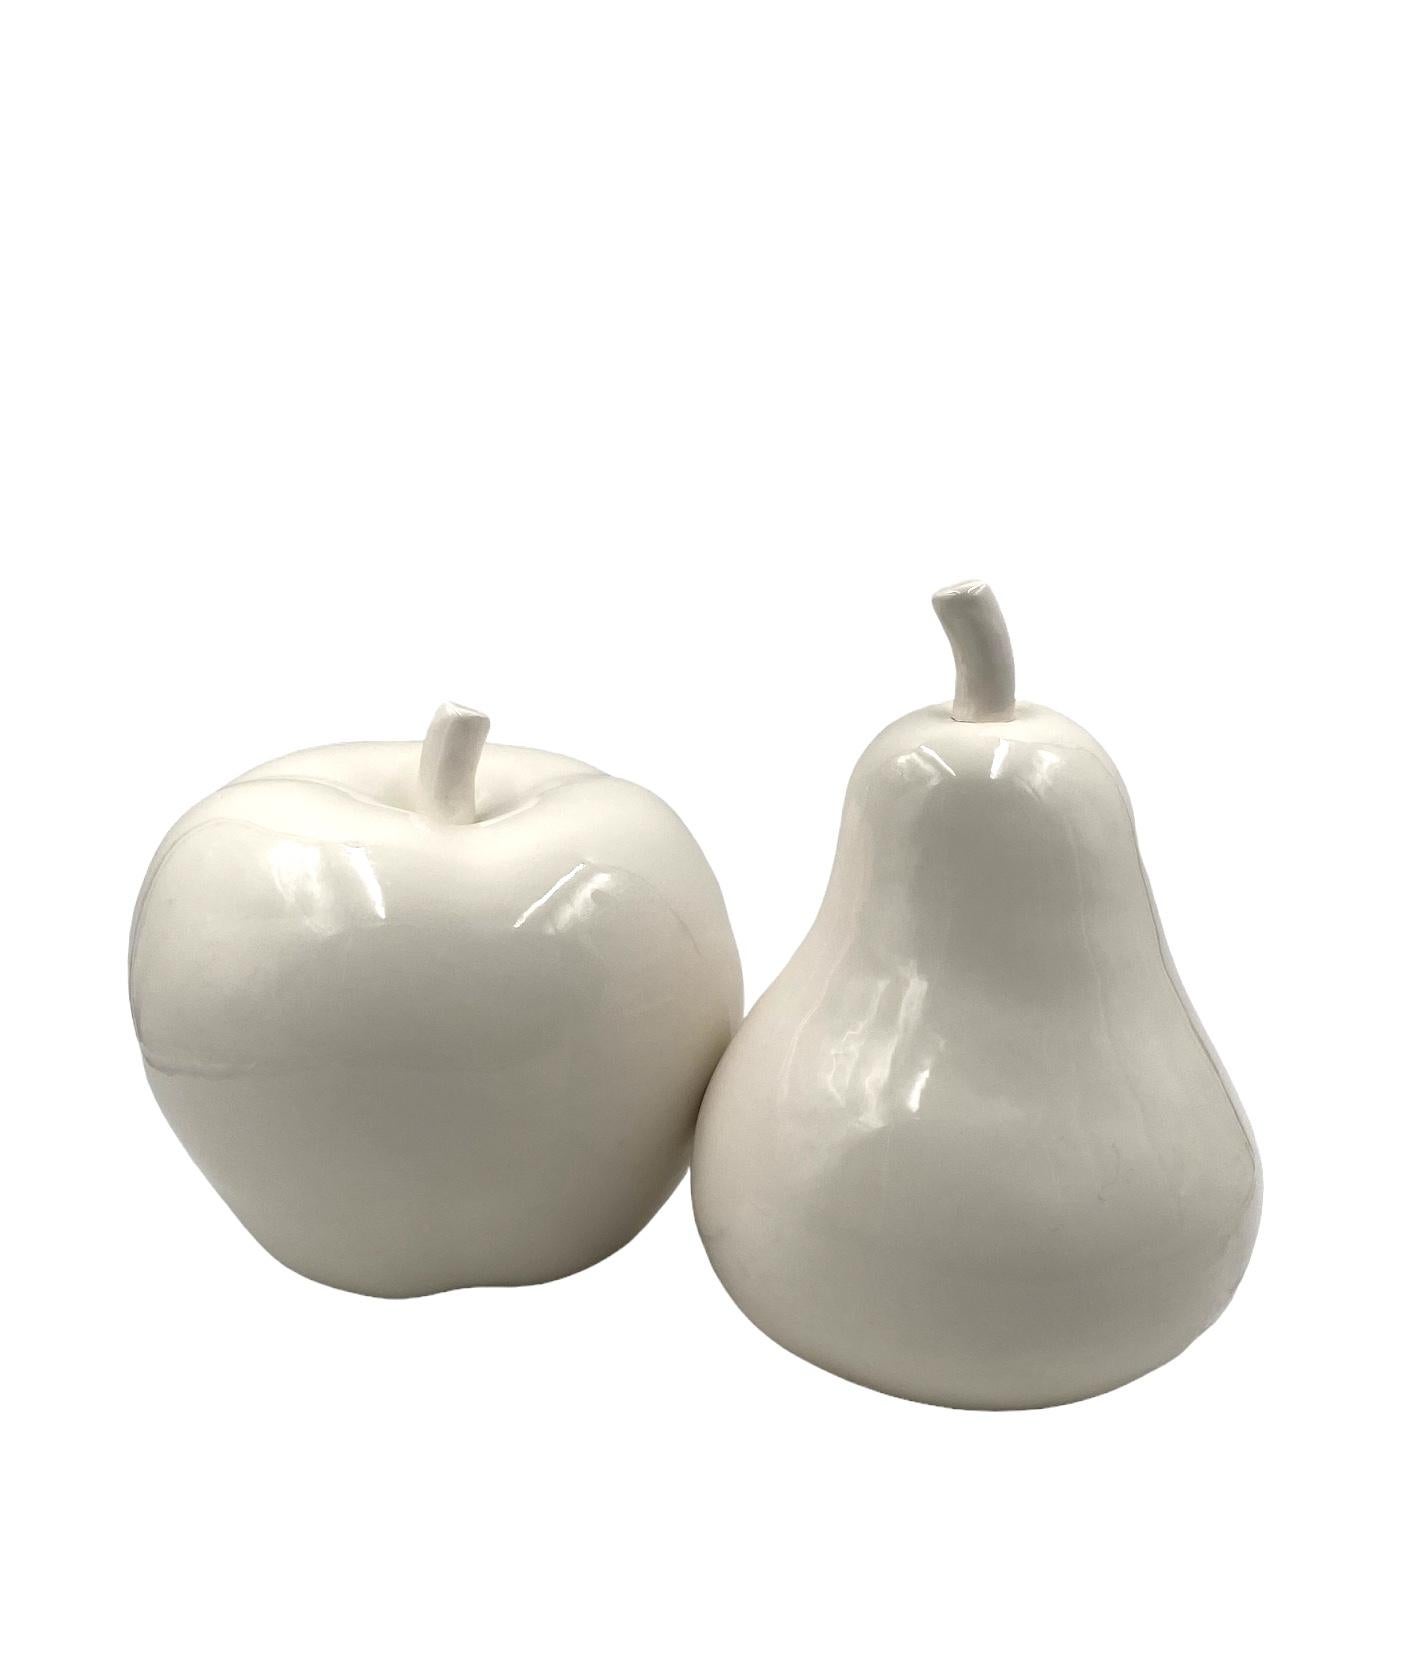 White ceramic Apple and Pear sculptures, Italy ca. 1980 For Sale 3